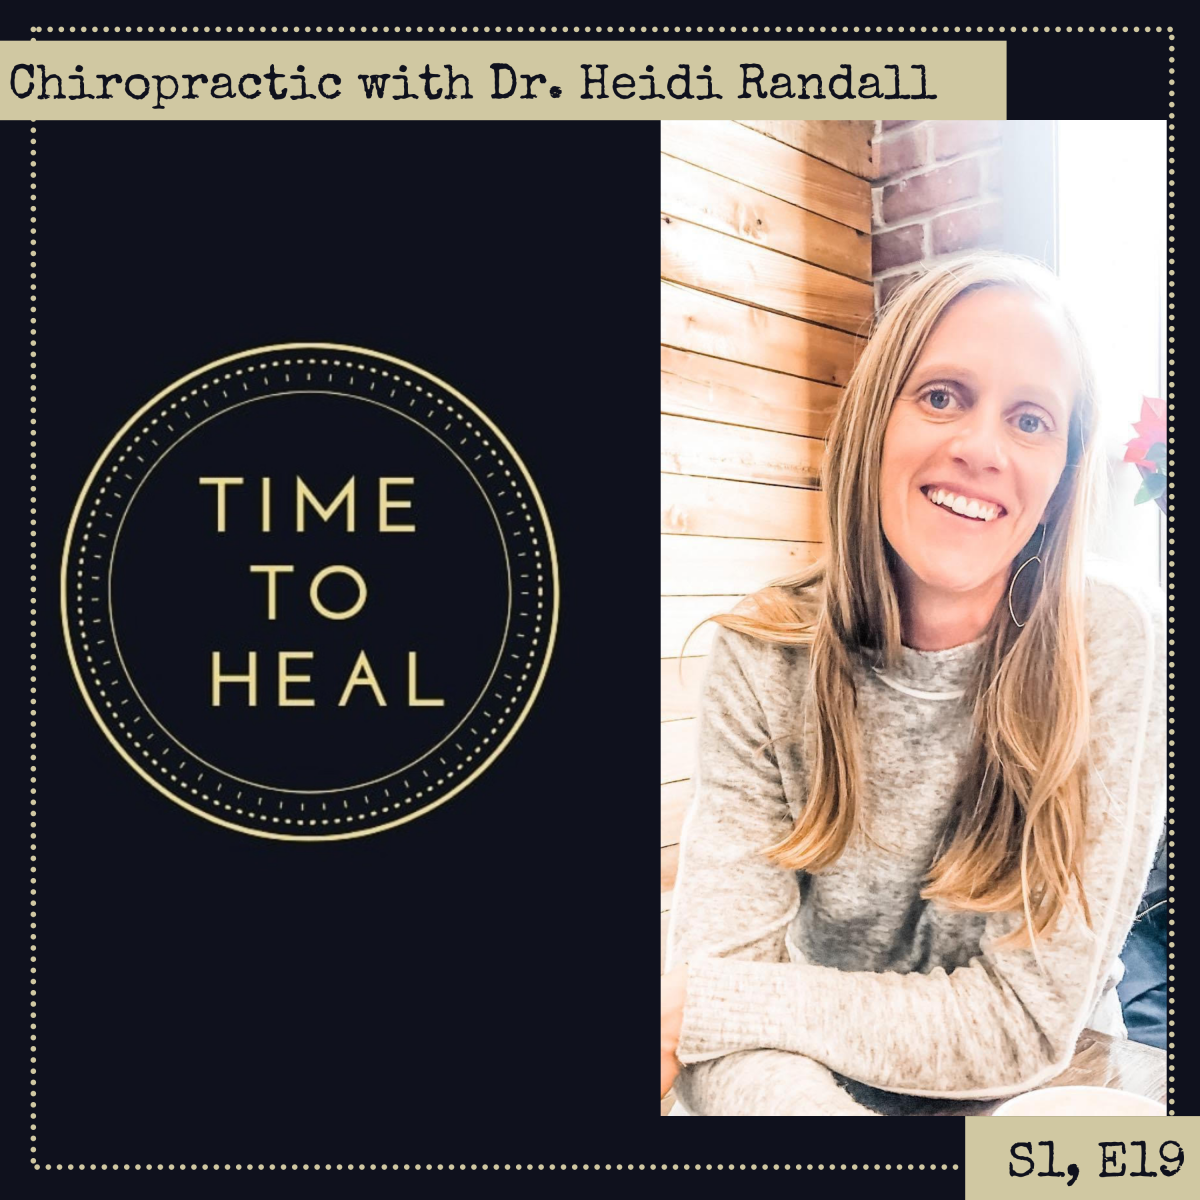 Chiropractic with Dr. Heidi Randall